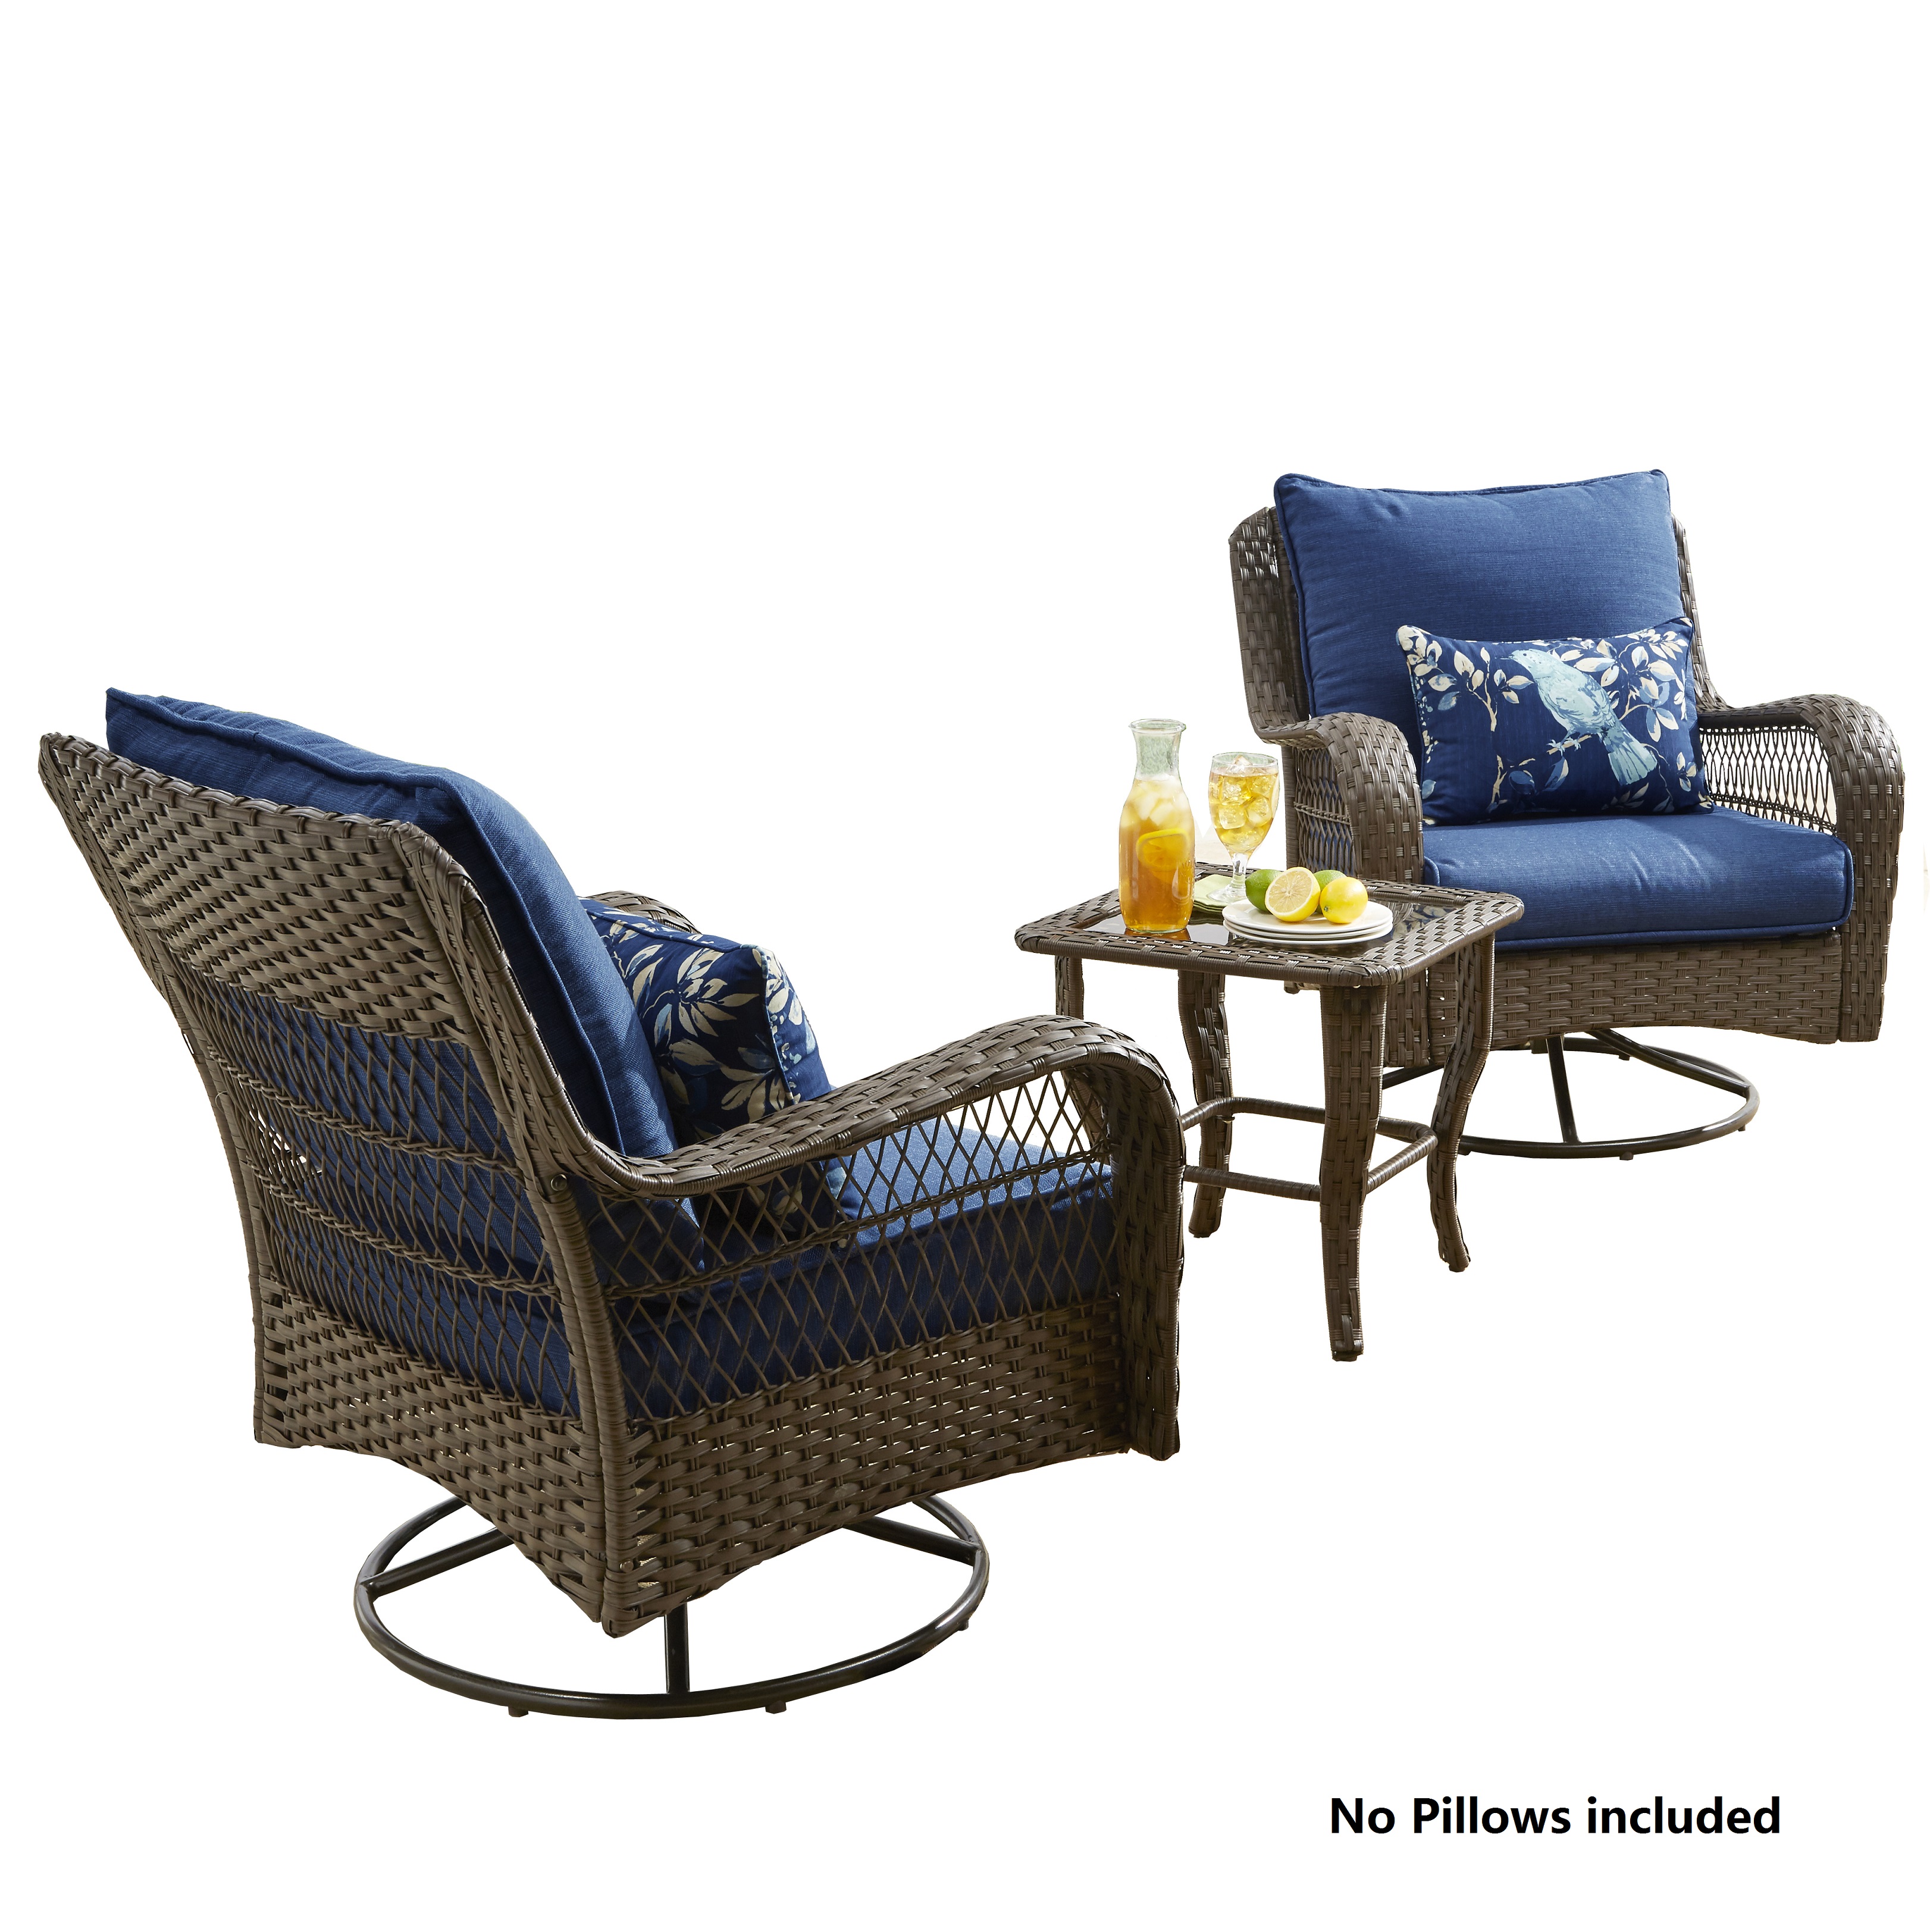 Better Homes and Gardens Outdoor Patio Furniture Colebrook 3 Piece Blue Chat set - image 1 of 7